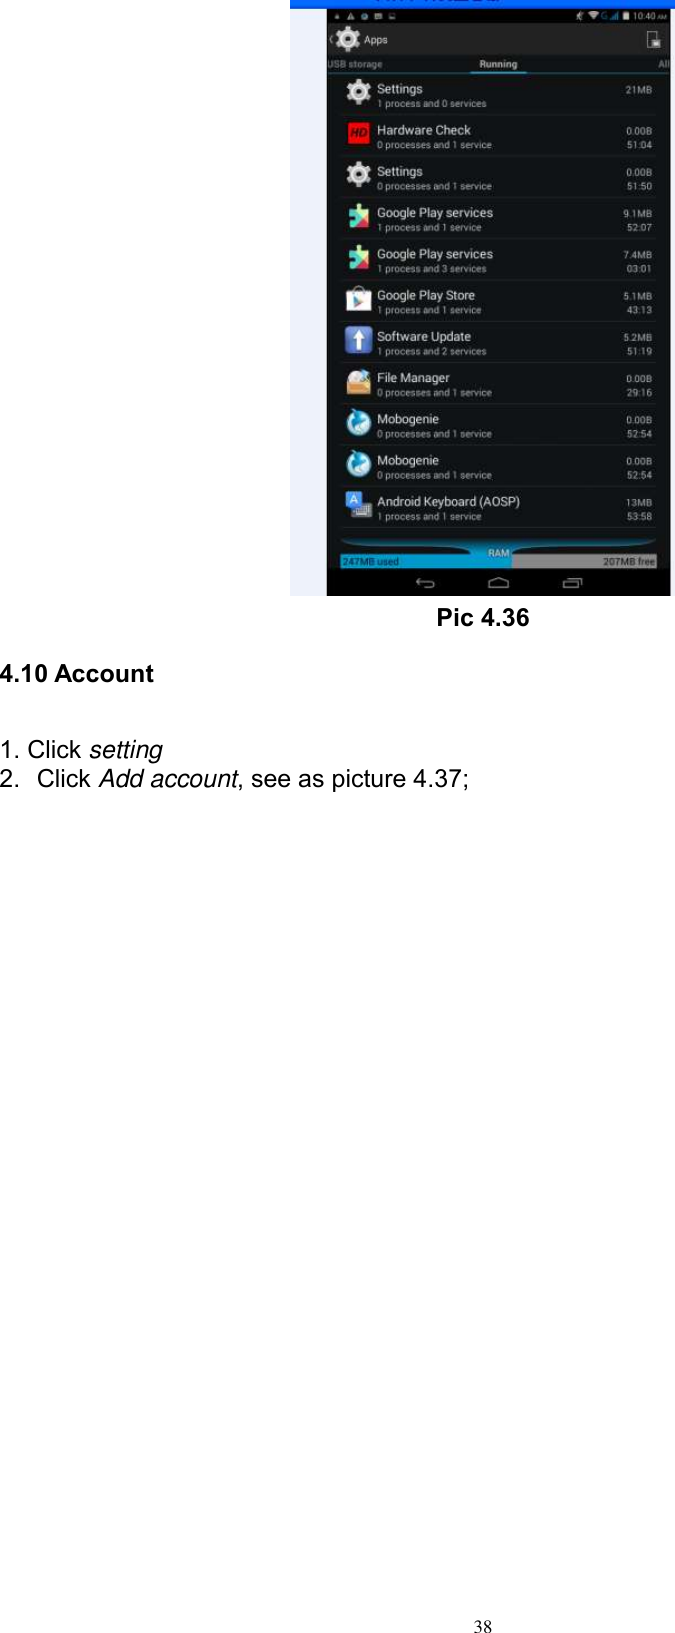      38  Pic 4.36 4.10 Account 1. Click setting 2.  Click Add account, see as picture 4.37; 